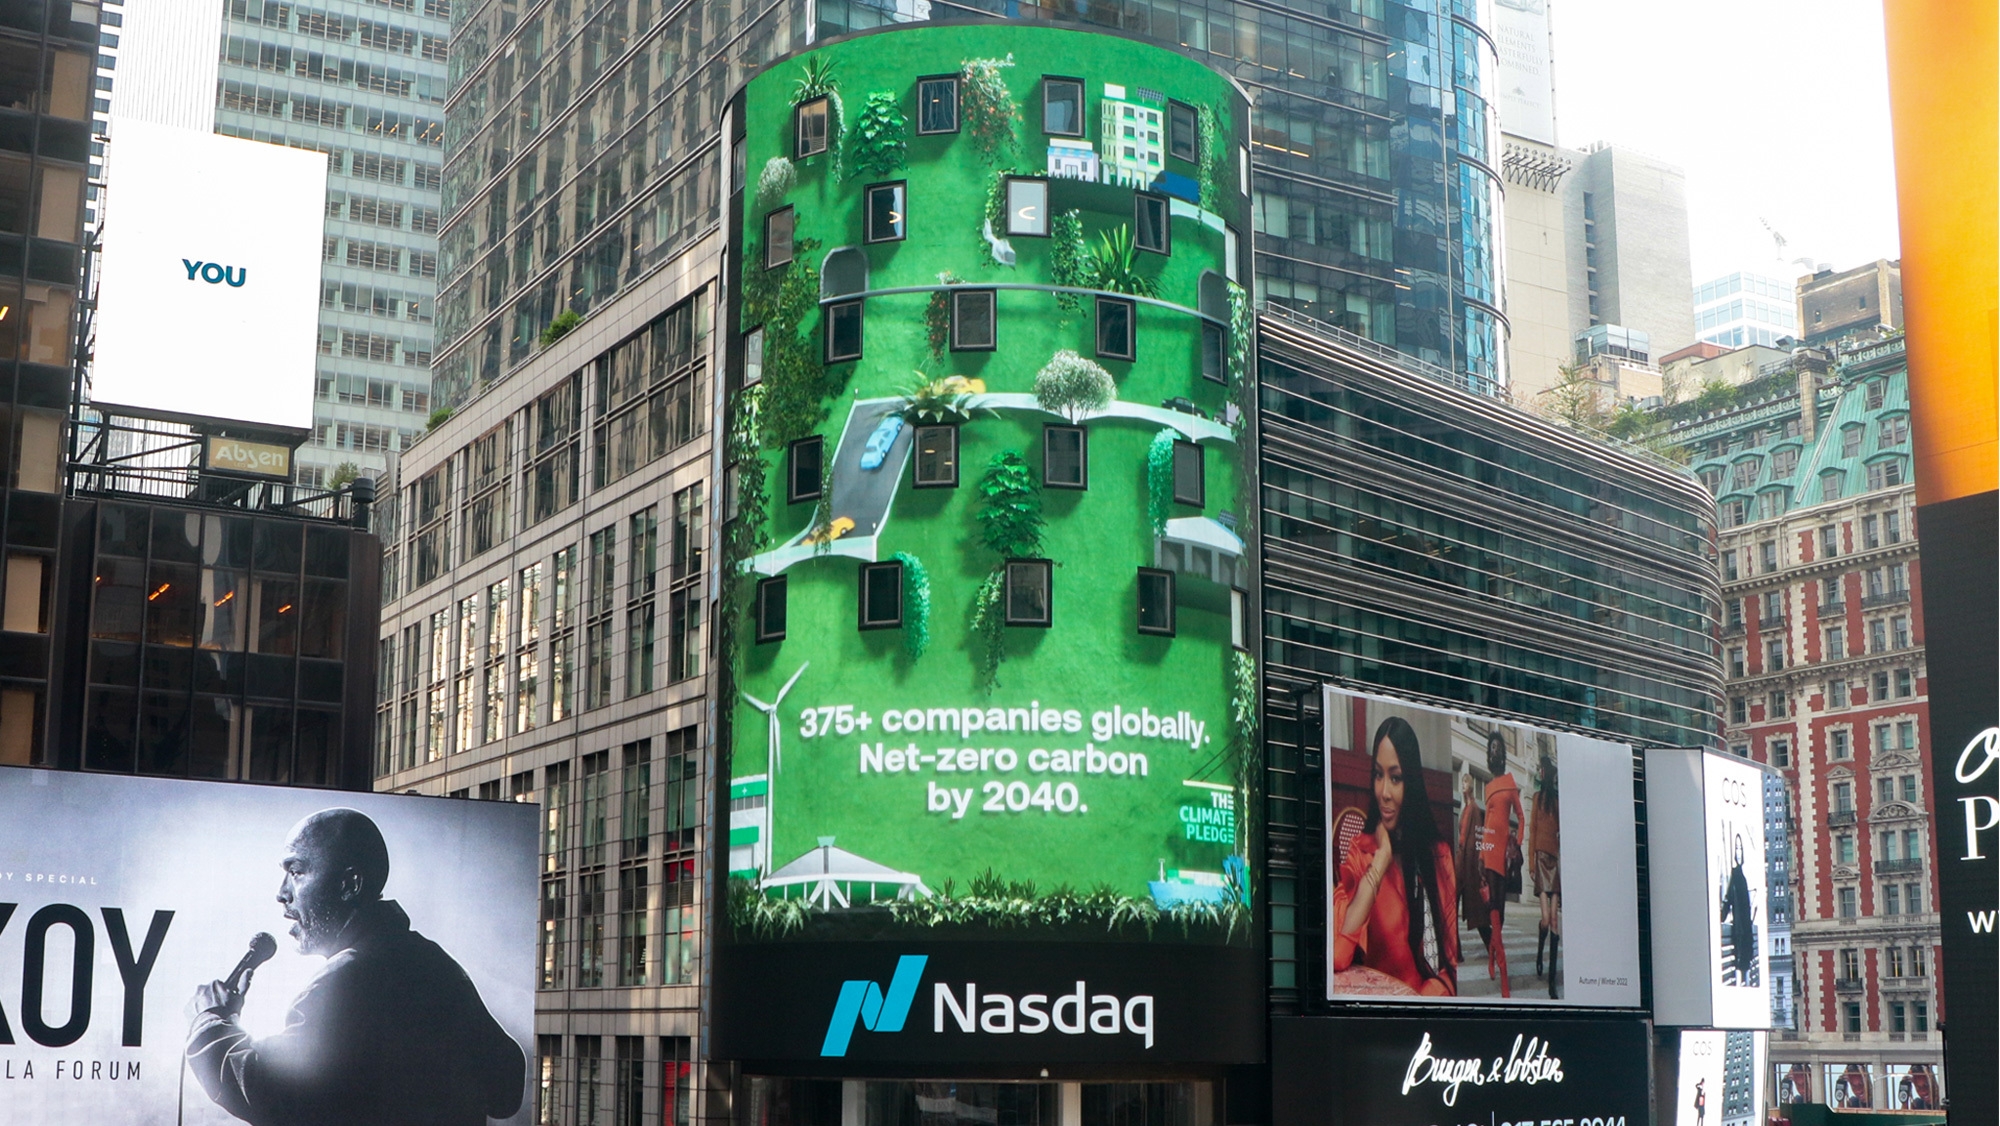 An image of a Climate Pledge Nasdaq Sign on a building that reads "375+ companies globally. Net-zero carbon by 2040."